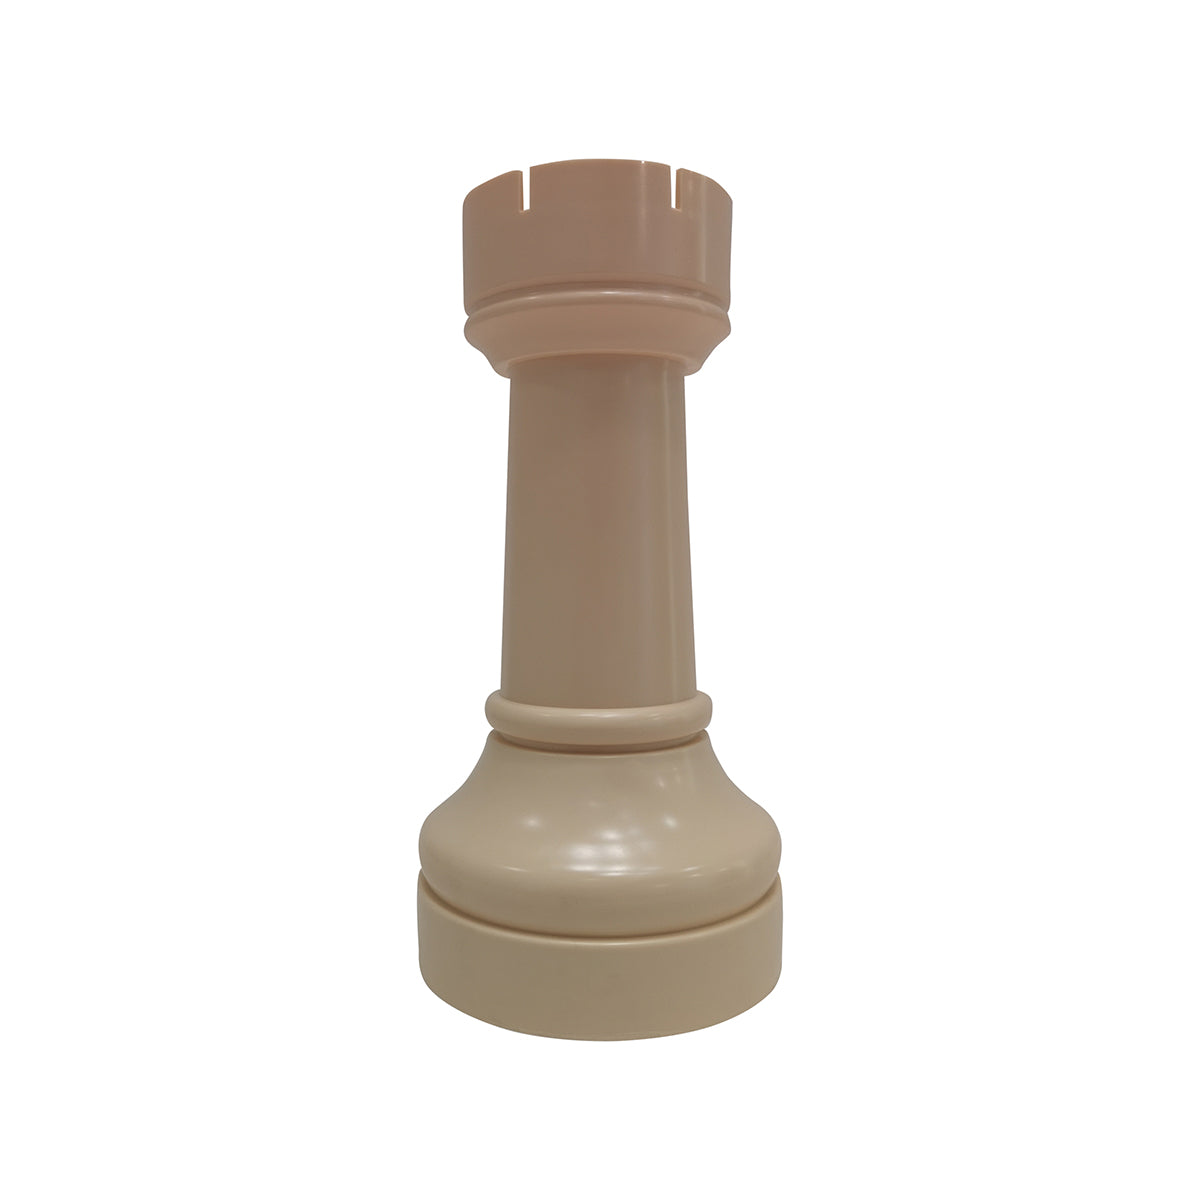 Giant Garden Chess 43cm Replacement Pieces Rook